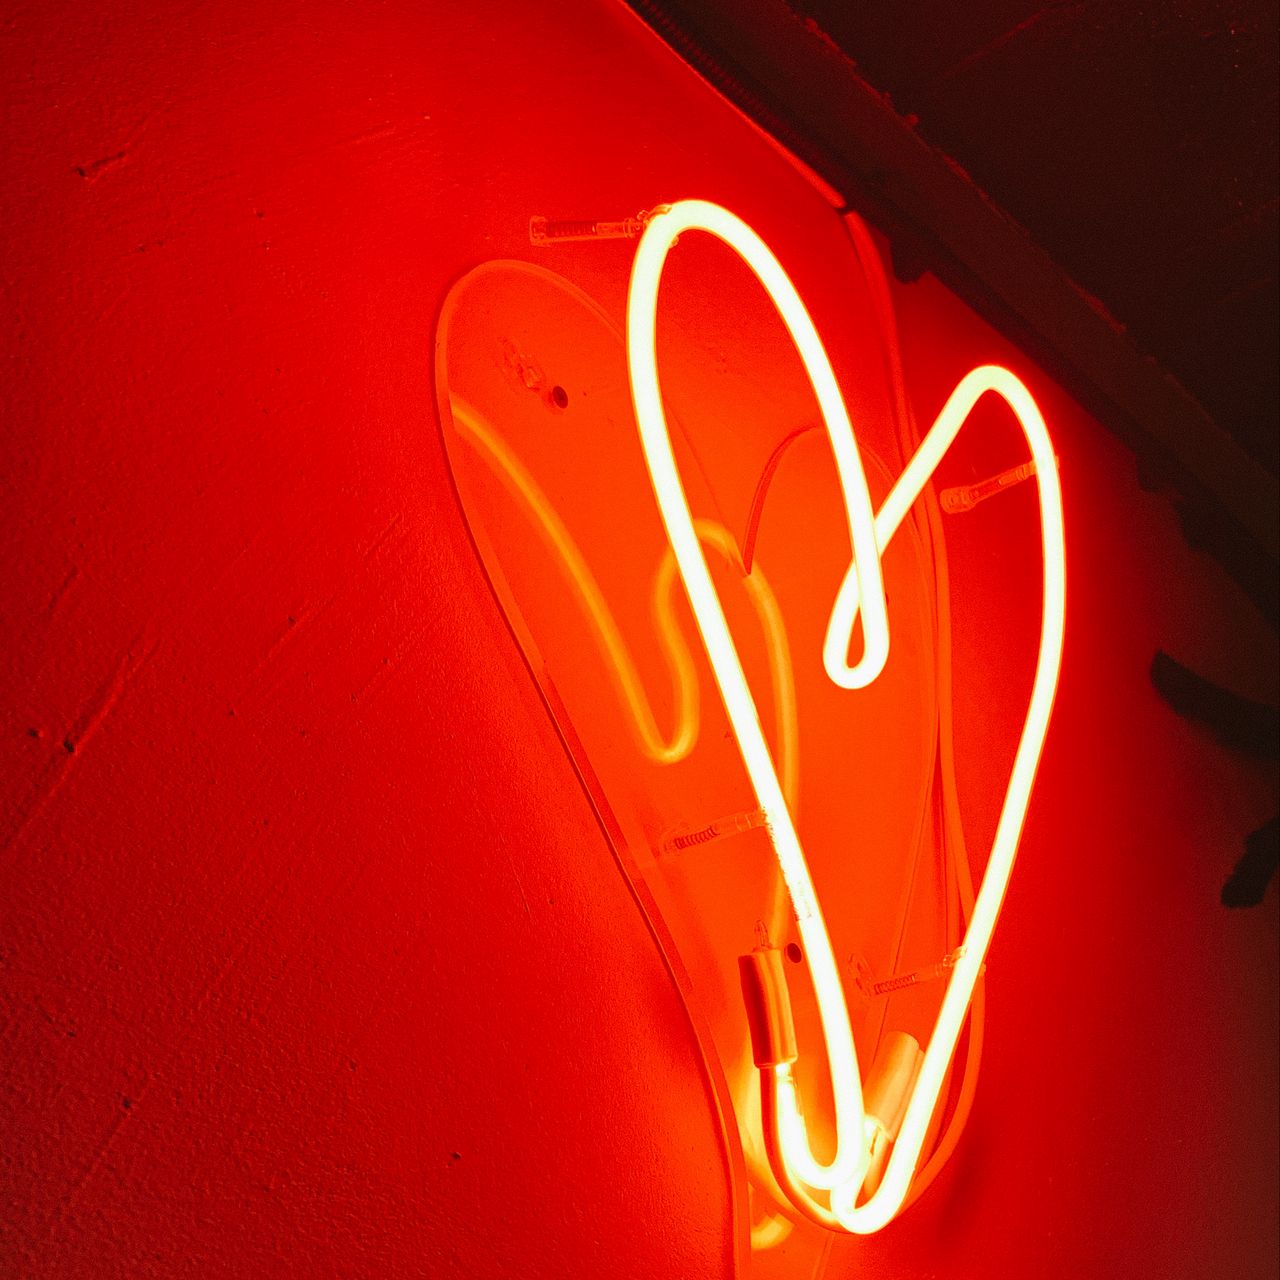 neon love backgrounds